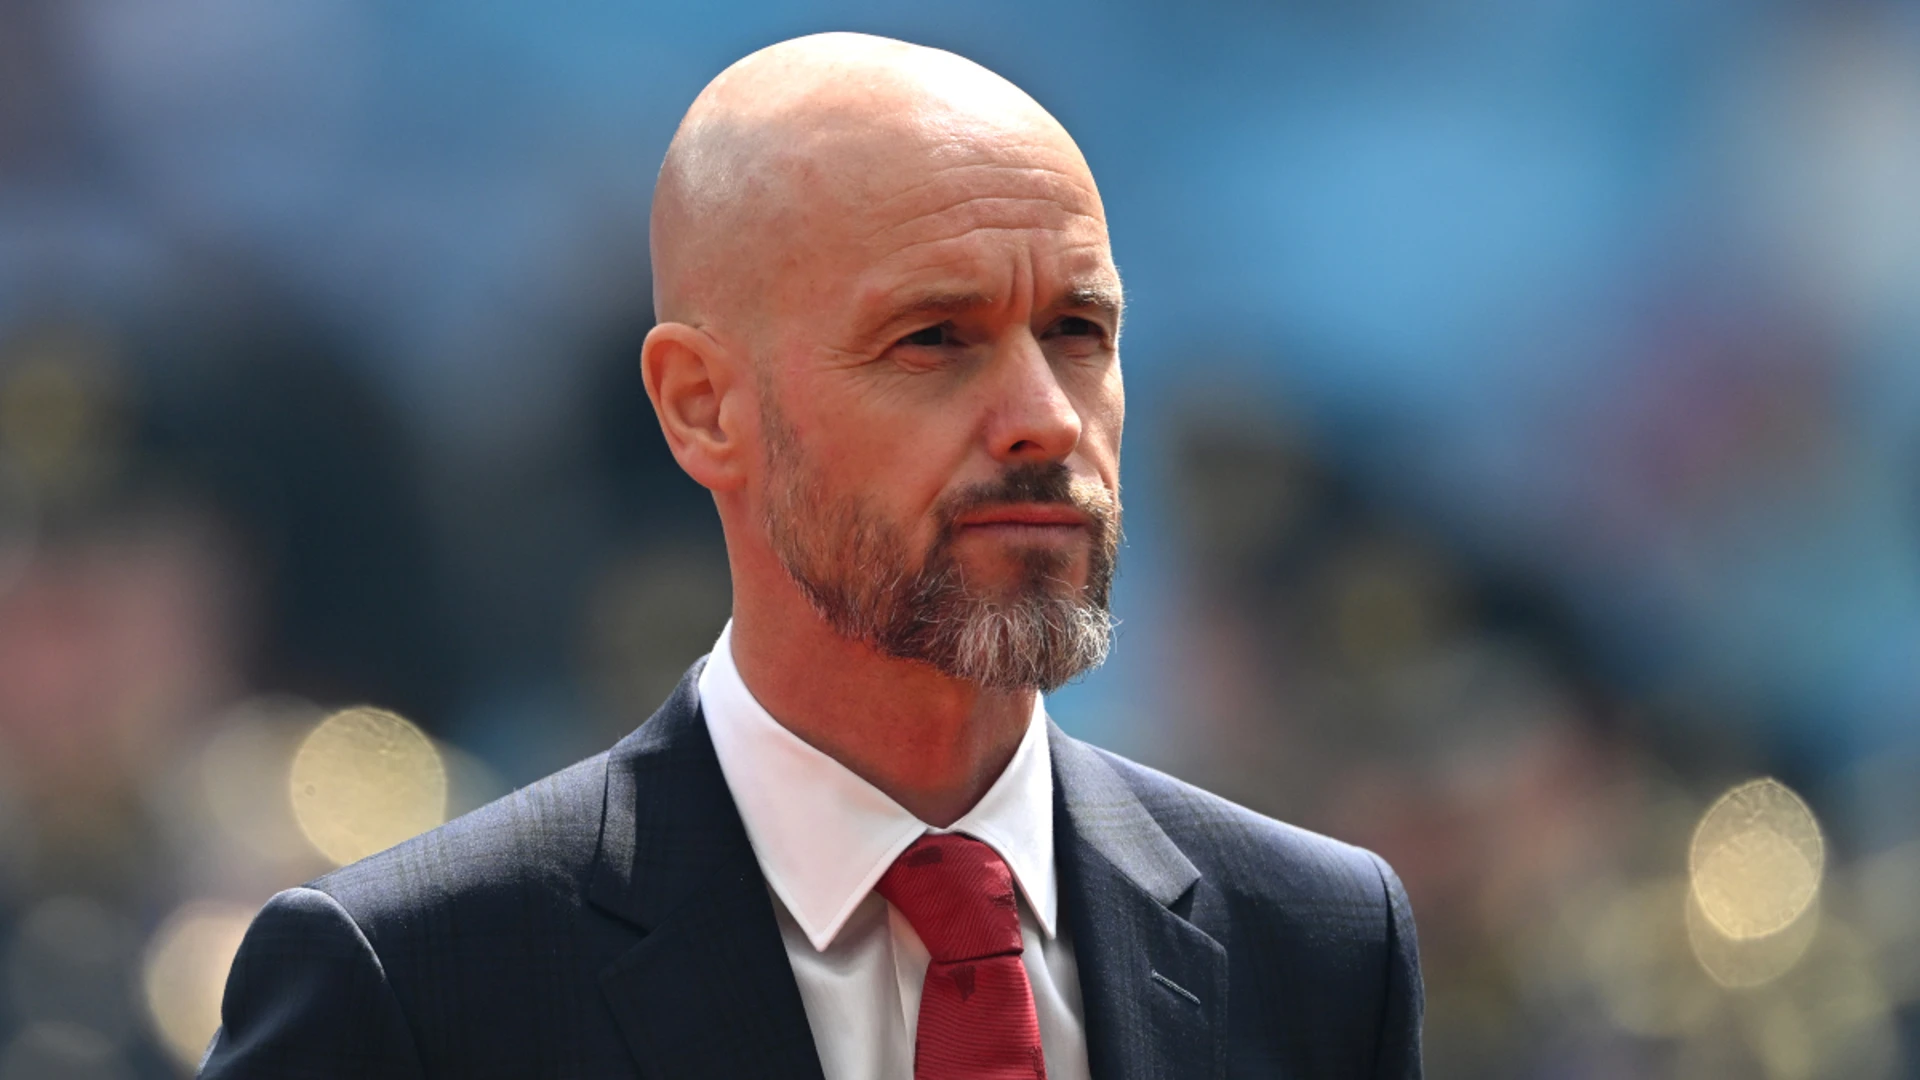 Ten Hag signs new deal at Manchester United